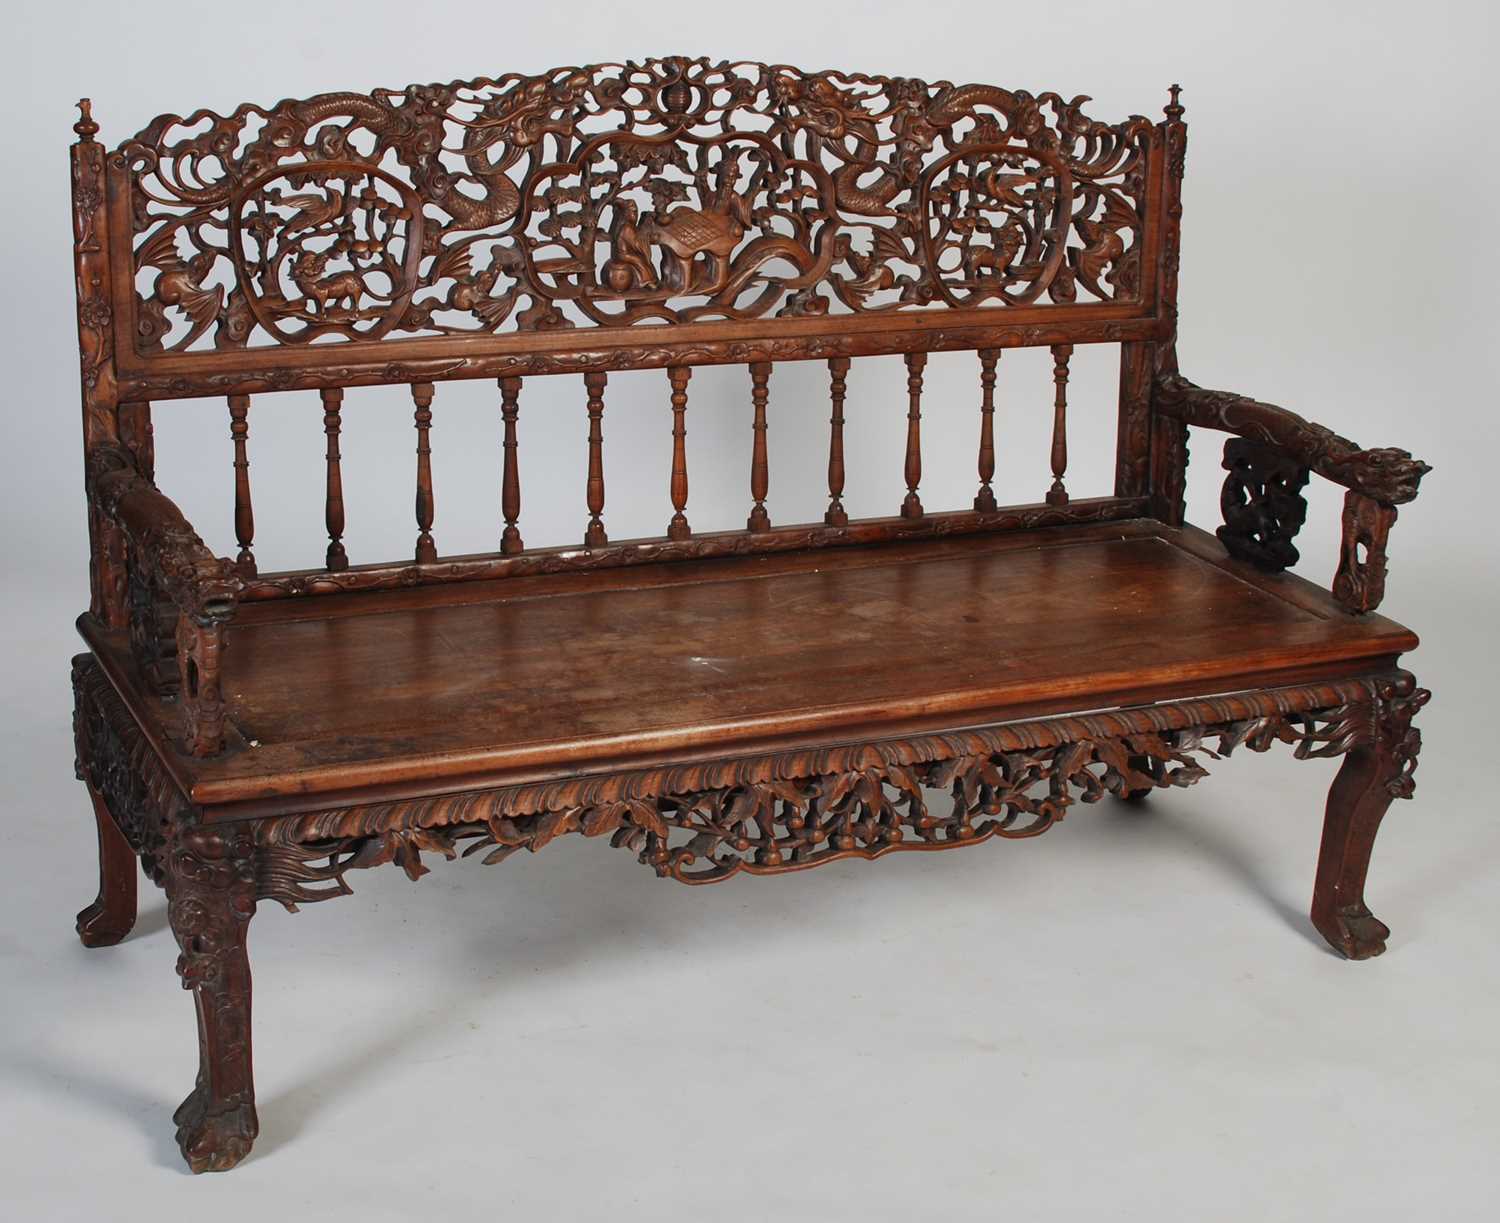 A Chinese dark wood bench, late 19th/ early 20th century, the rectangular back carved and pierced